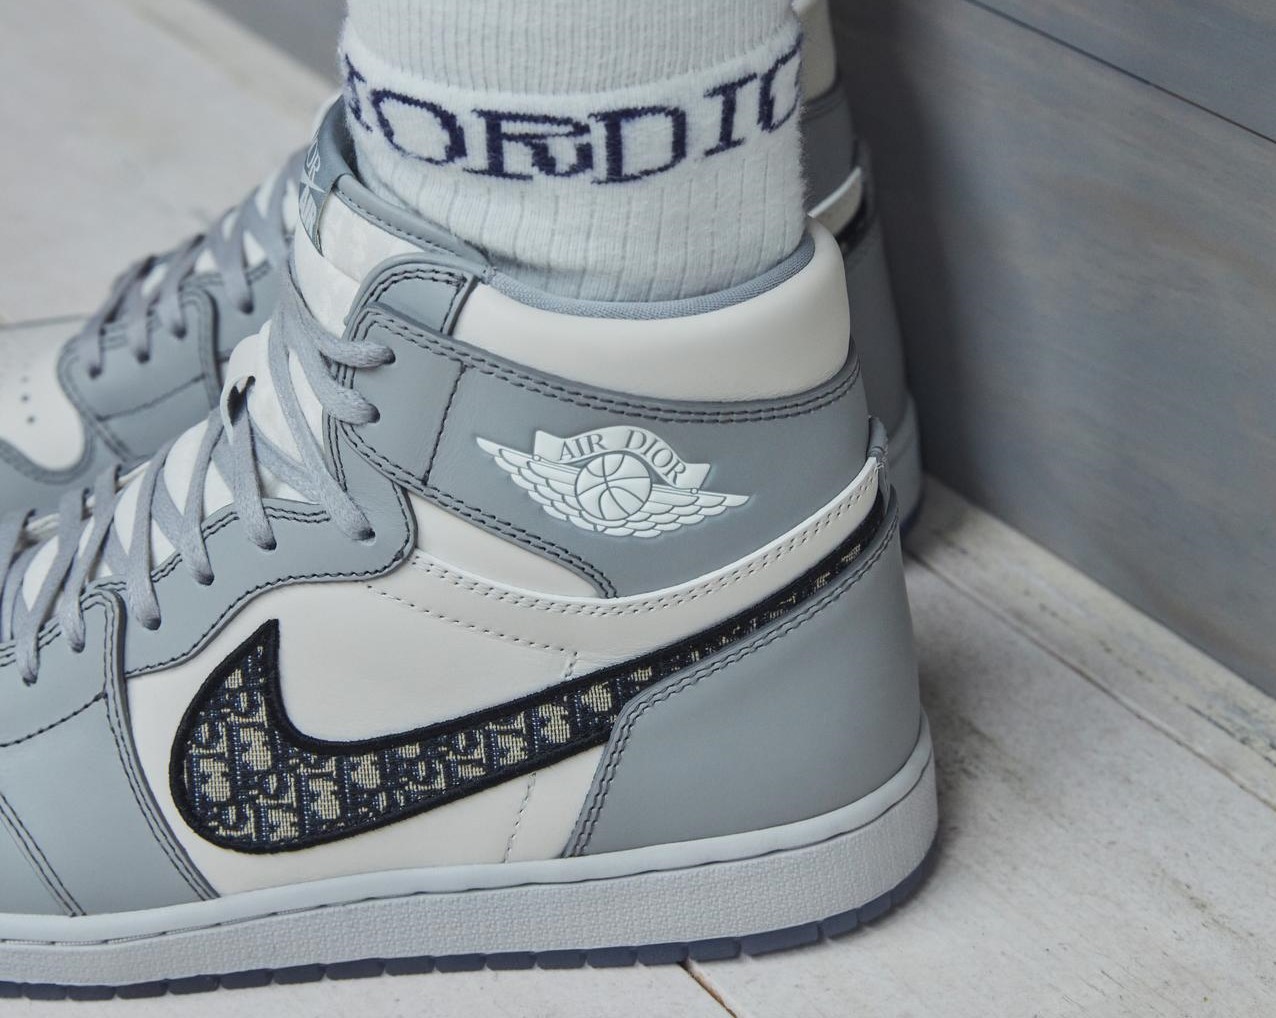 The Dior Air Jordan 1 Collab Is a Luxe Upgrade Of An Iconic Sneaker - Maxim